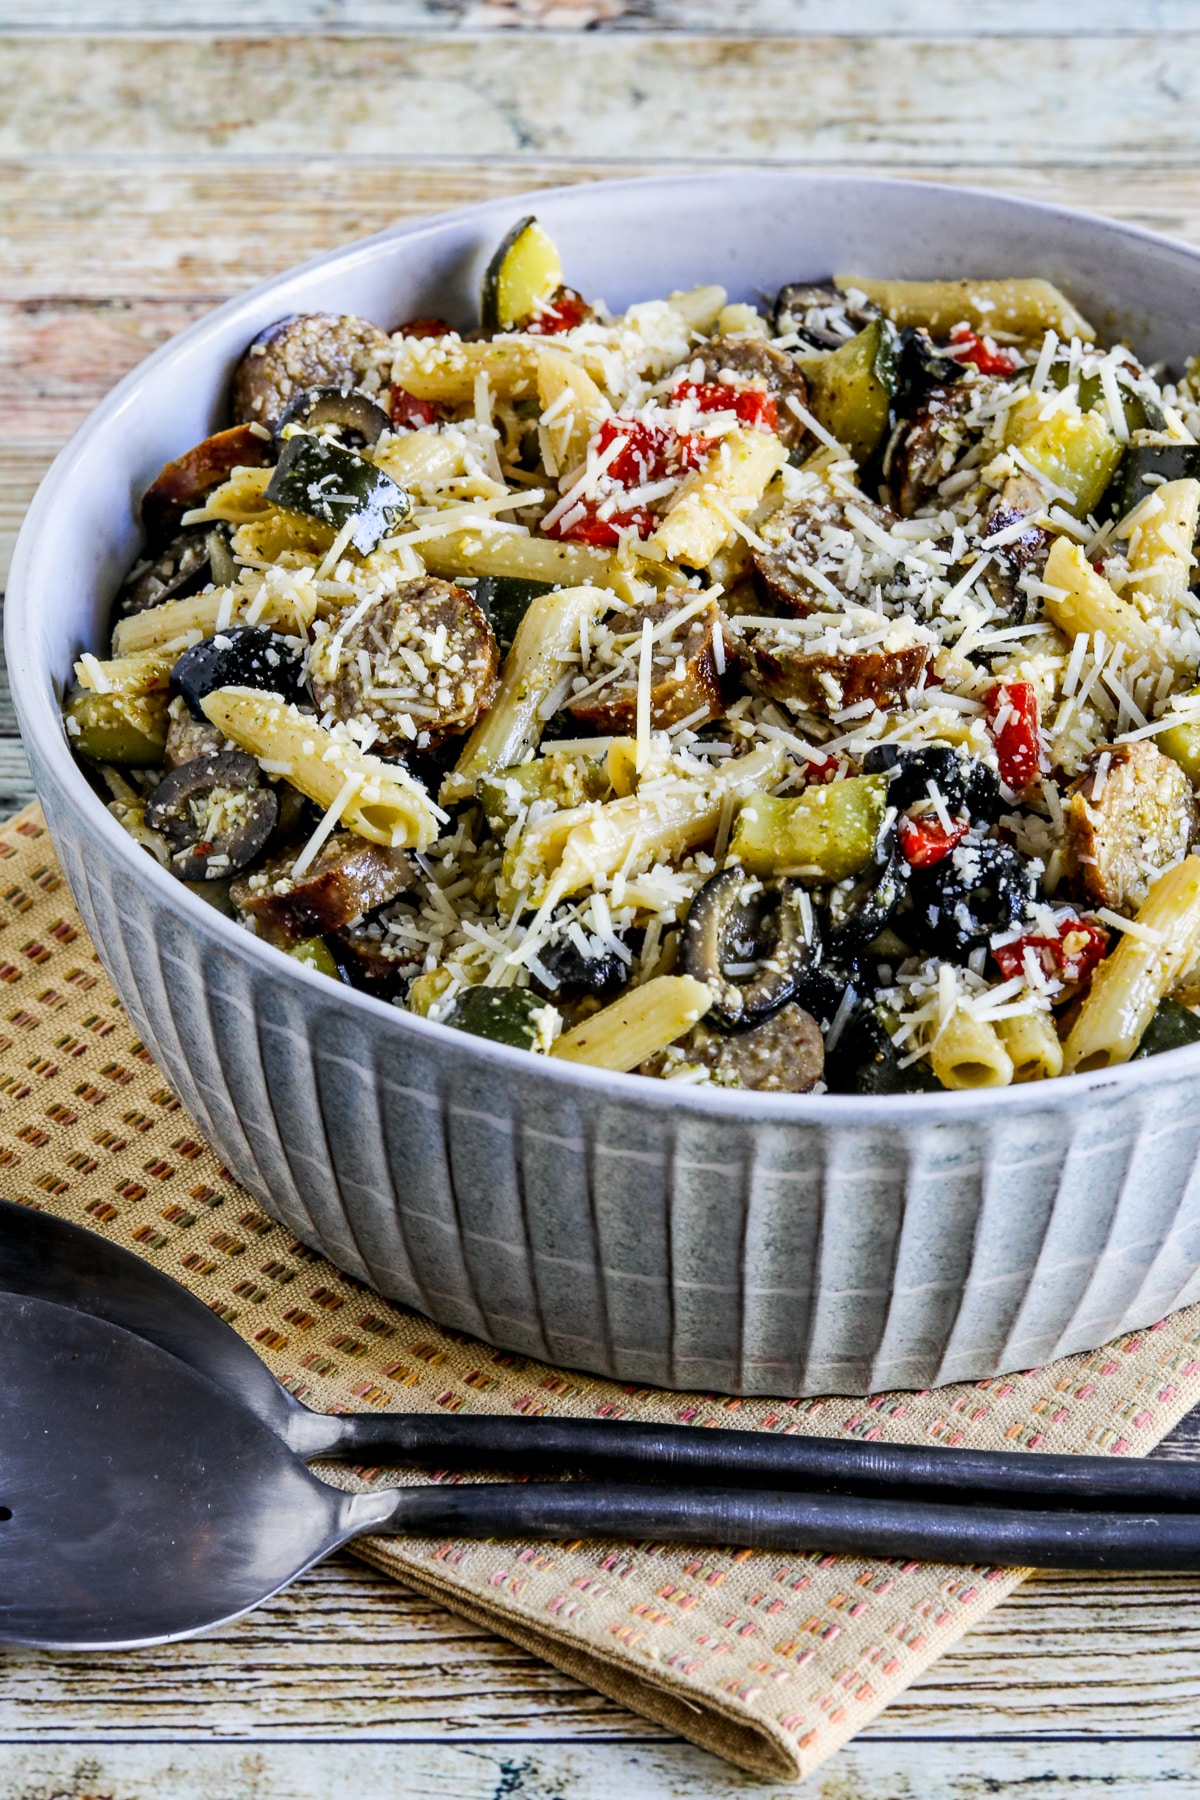 Pasta Salad with Sausage, Zucchini, Olives, and PeppersKalyn DennyKalyn’s Kitchen